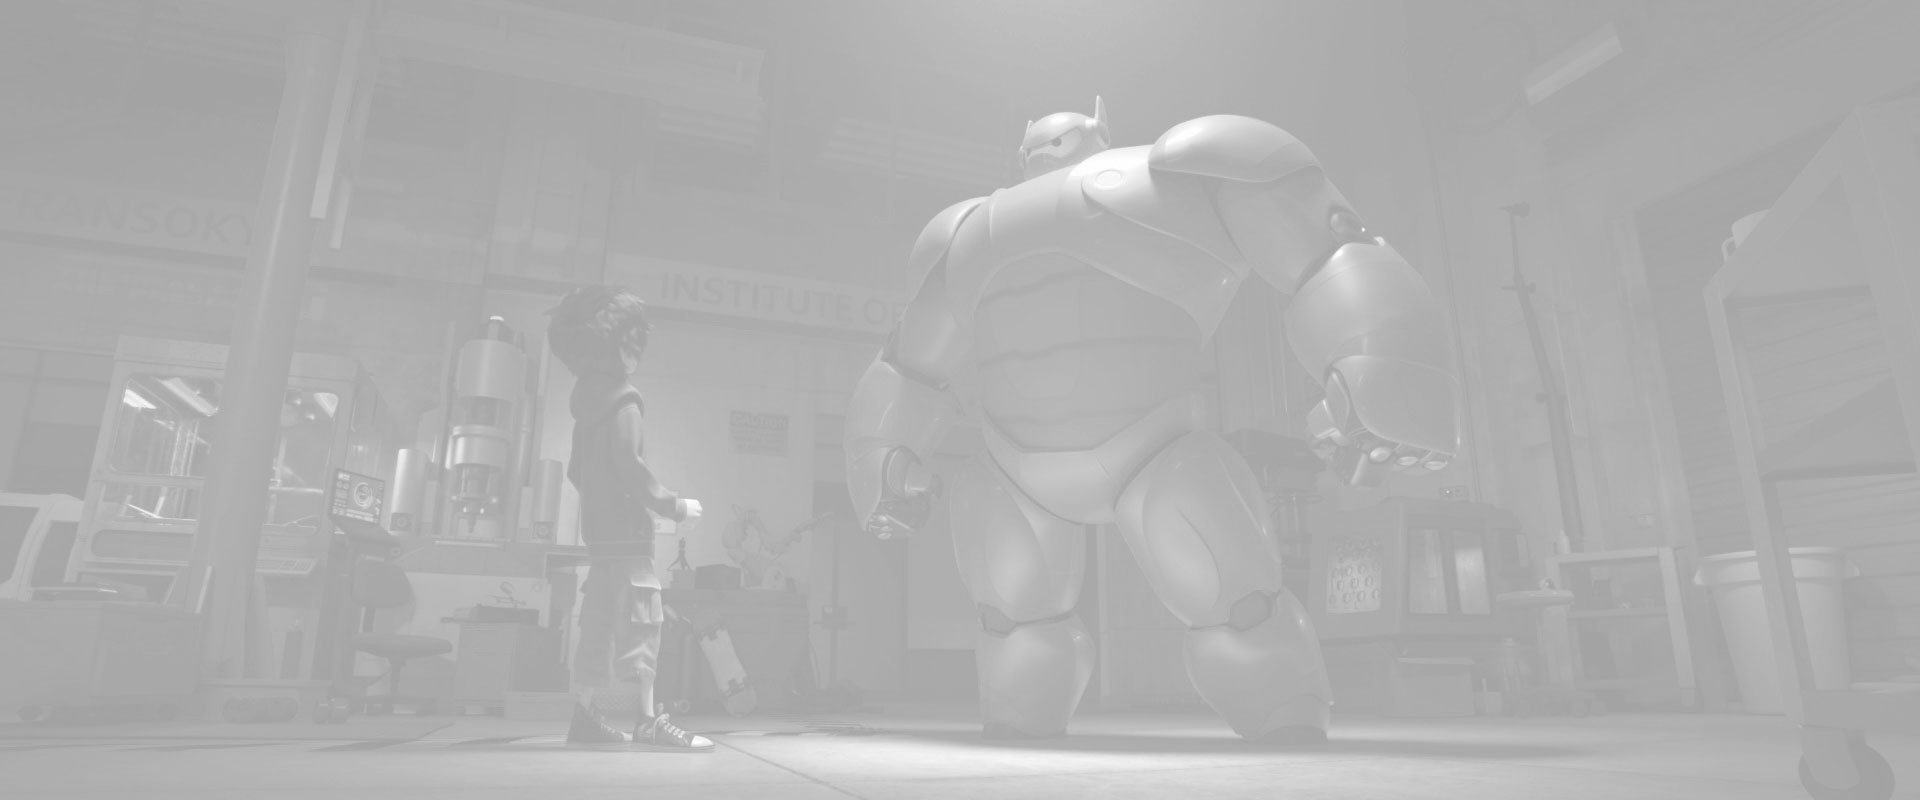 2024_project_into_images_bighero6